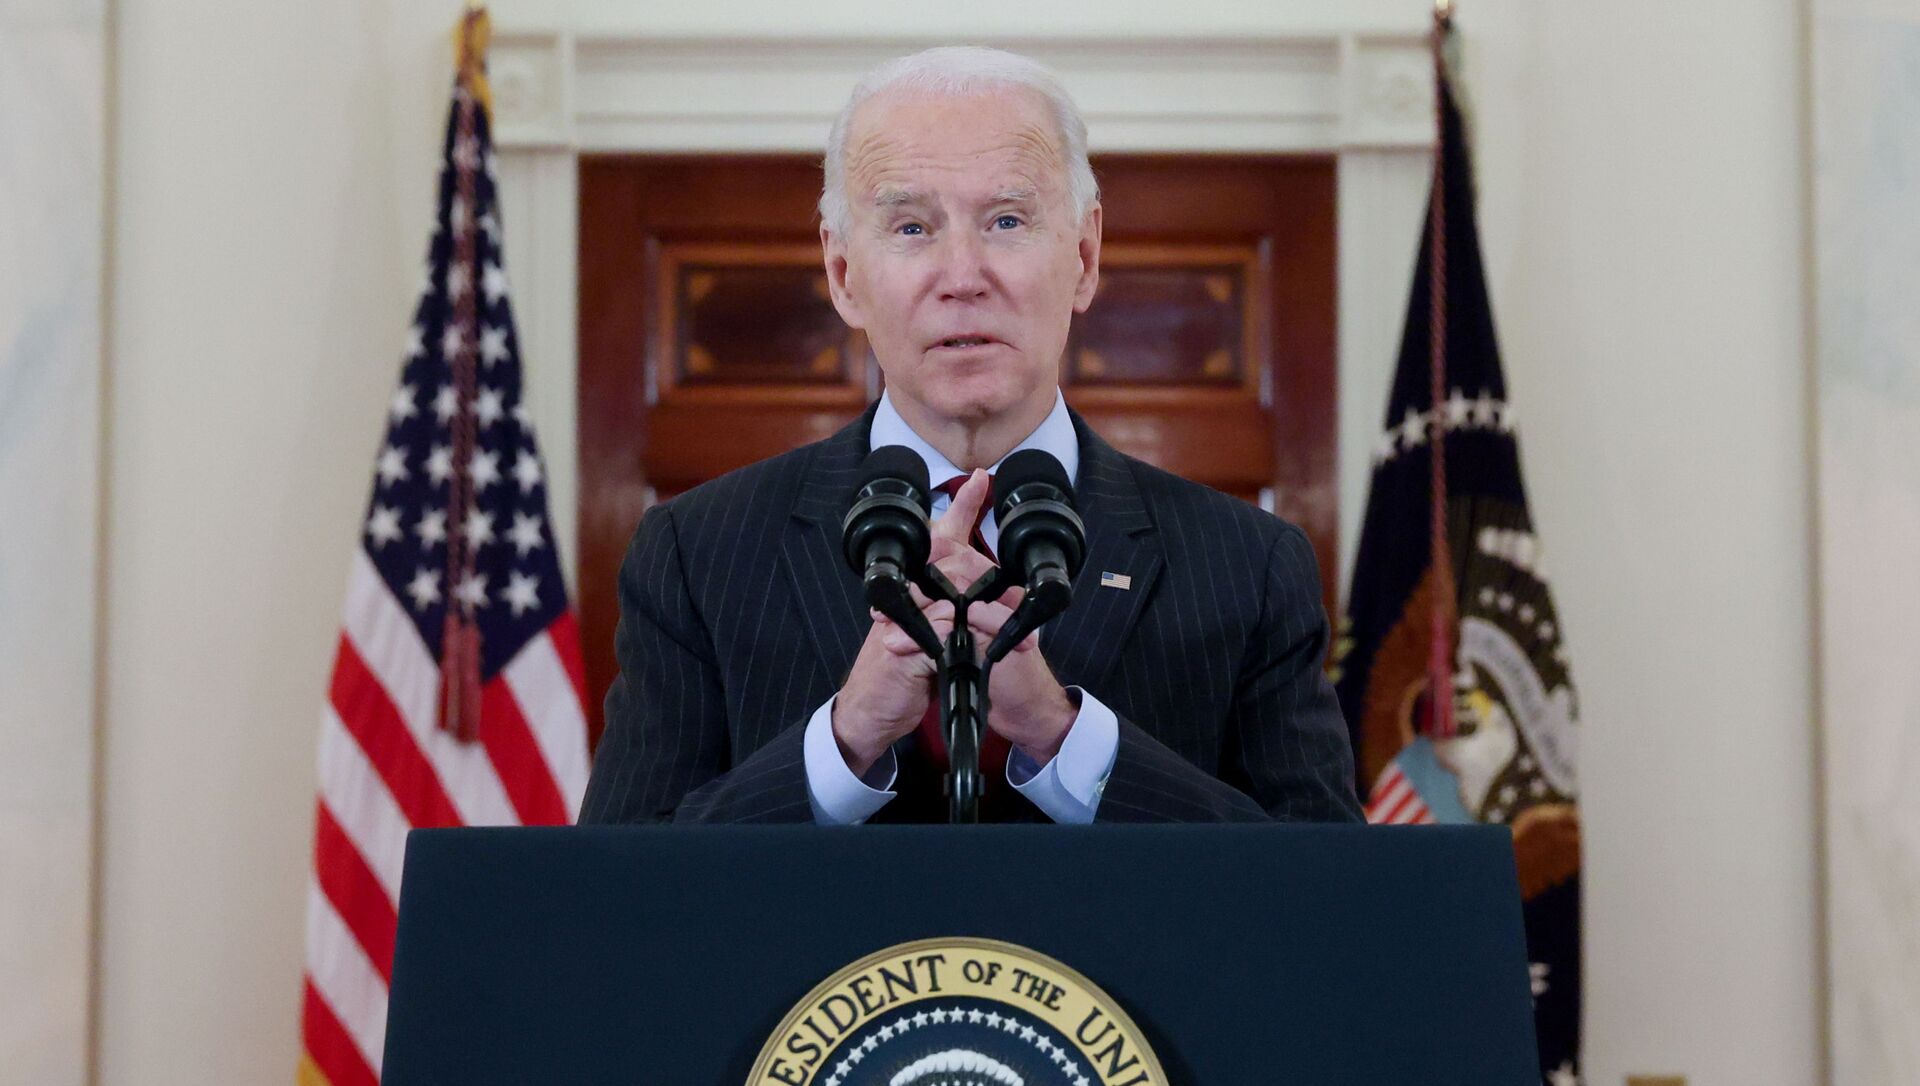 U.S. President Joe Biden delivers remarks in honor of the 500,000 U.S. deaths from the coronavirus disease (COVID-19), in the Cross Hall at the White House in Washington, U.S., February 22, 2021. - Sputnik Afrique, 1920, 09.03.2021